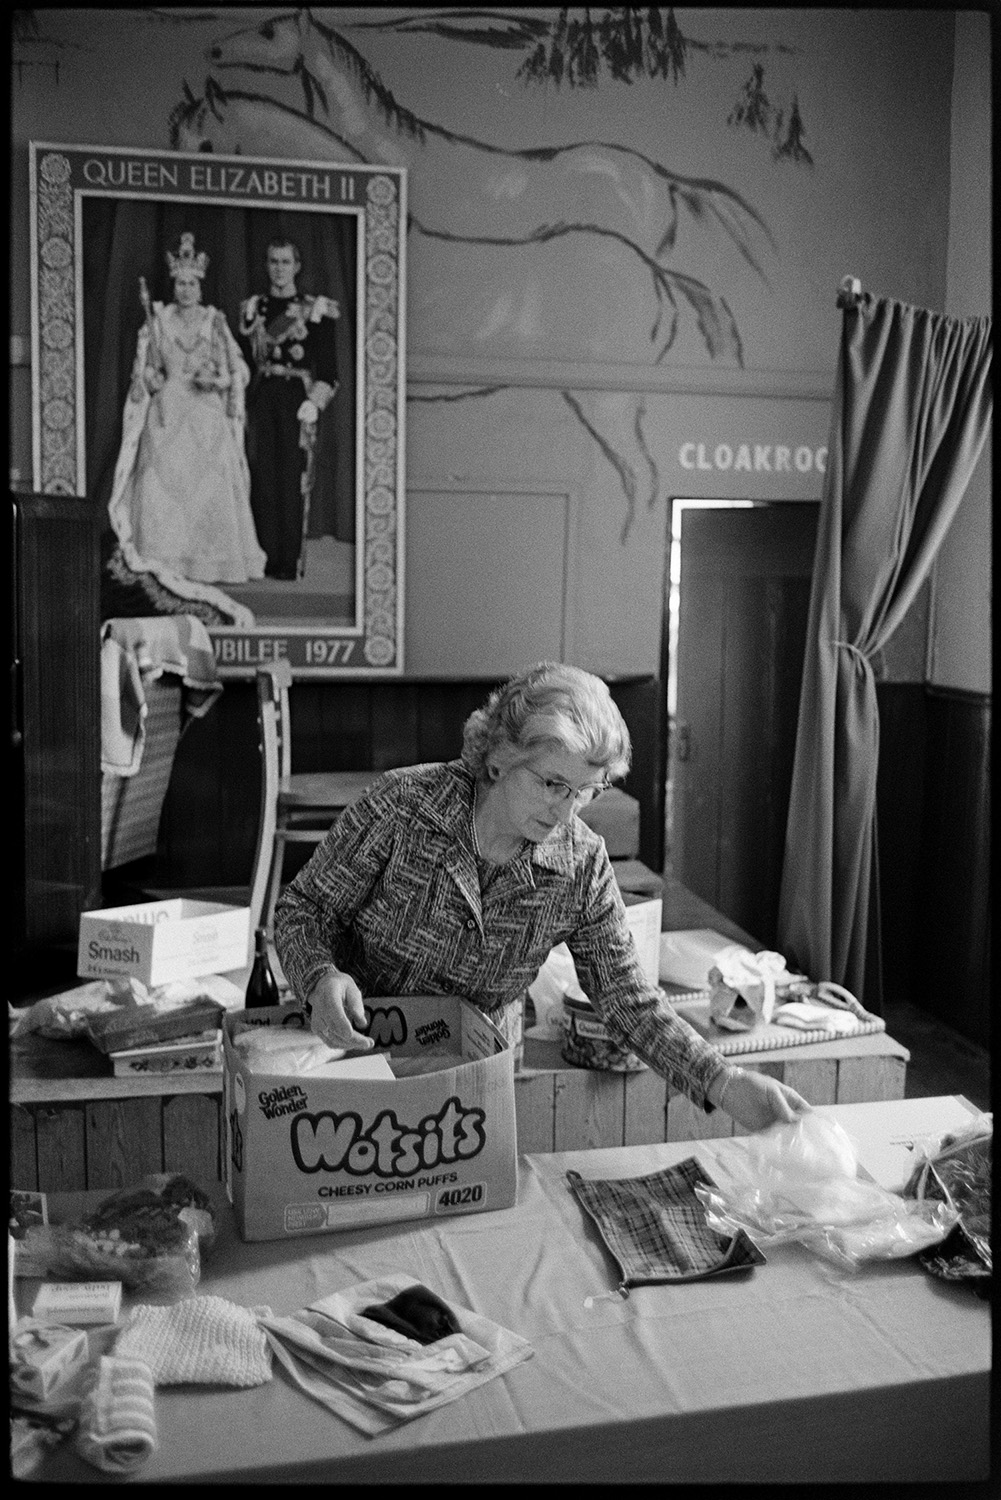 Stalls in village hall, women setting out cakes and produce.
[A woman setting out products on a cloth covered table in Roborough Village Hall, for Roborough Fair. A wall mural of horses is visible on the wall in the background, behind a large picture of Queen Elizabeth II and the Duke of Edinburgh commemorating her Silver Jubilee in 1977.]